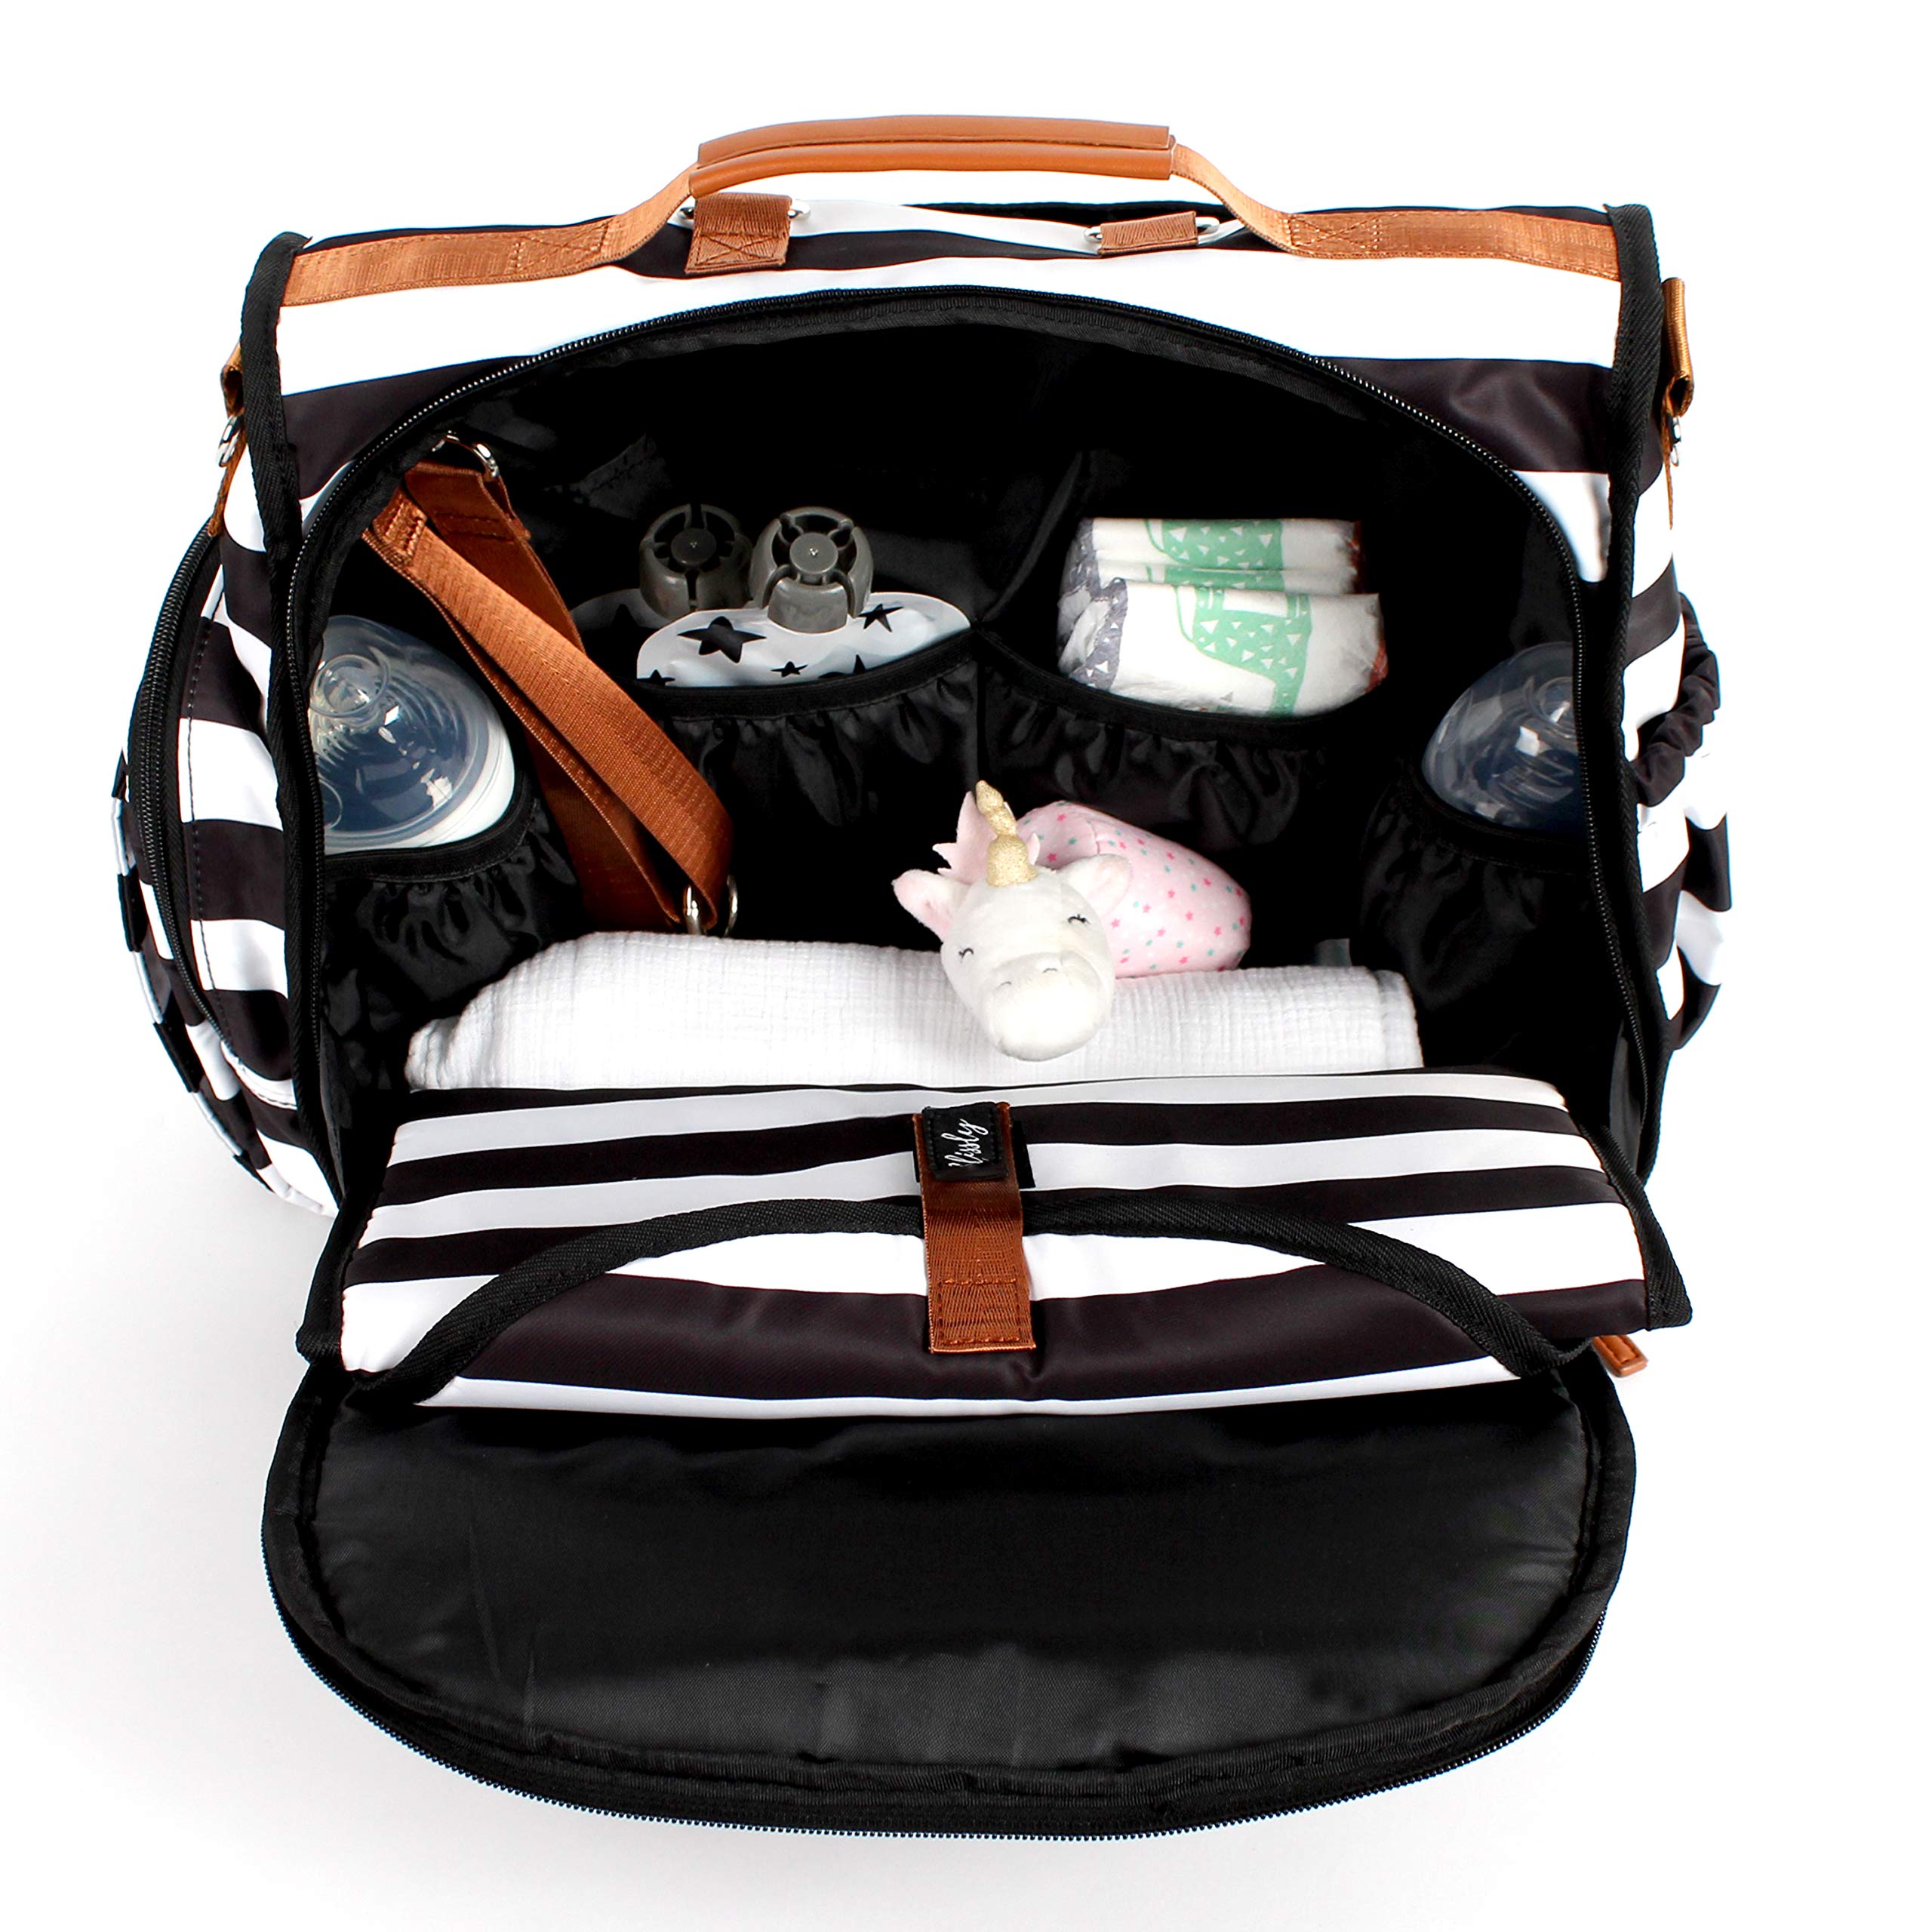 Blissly Convertible Baby Diaper Bag Tote, Stylish and Trendy